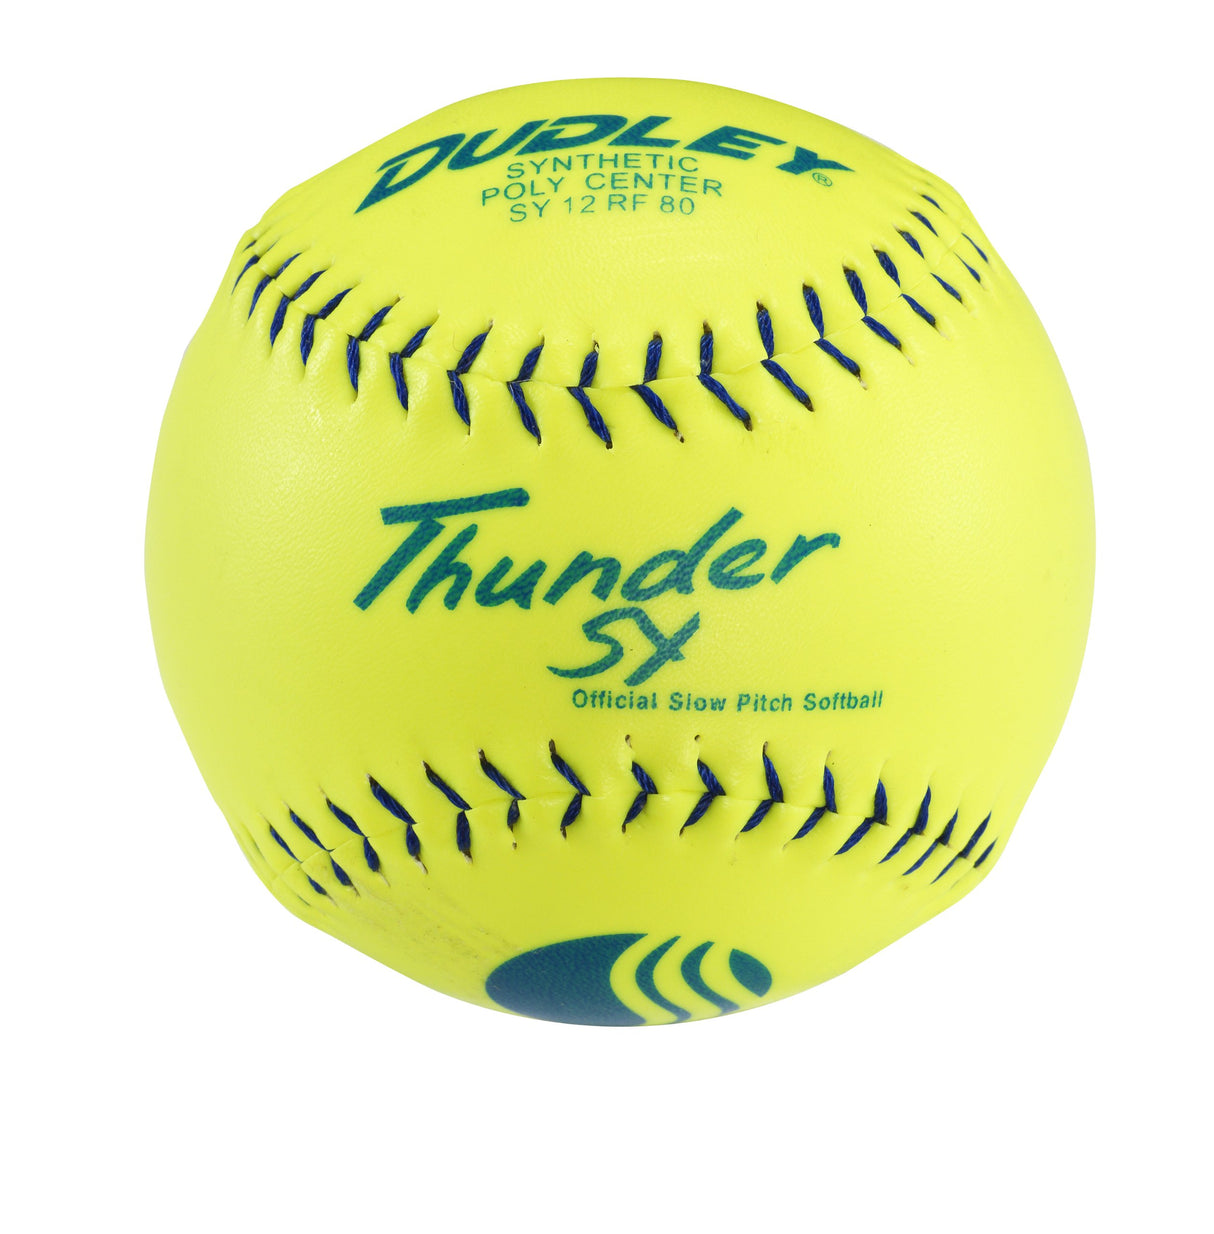 DUDLEY USSSA Thunder SY Slowpitch Classic M Stamp Softball - 12 Pack